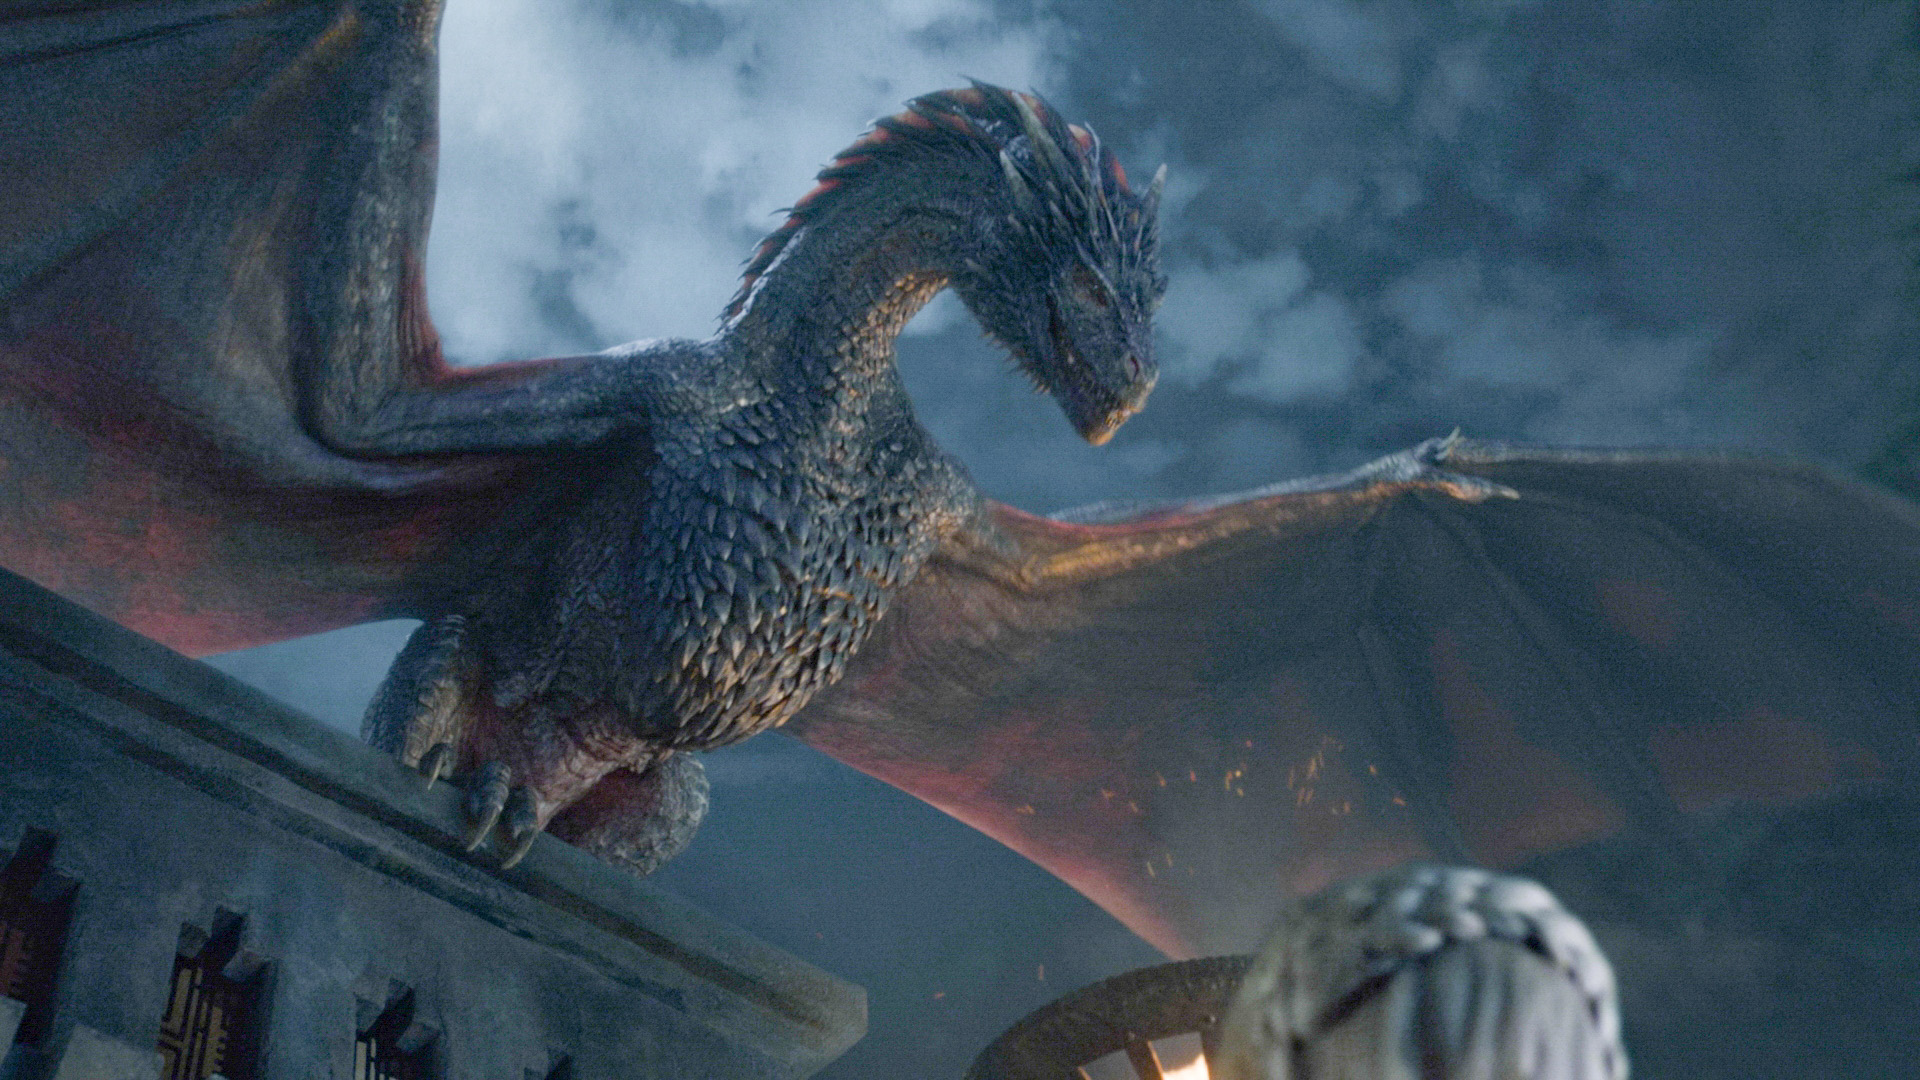 A huge dragon perched on a building with its wings outspread.